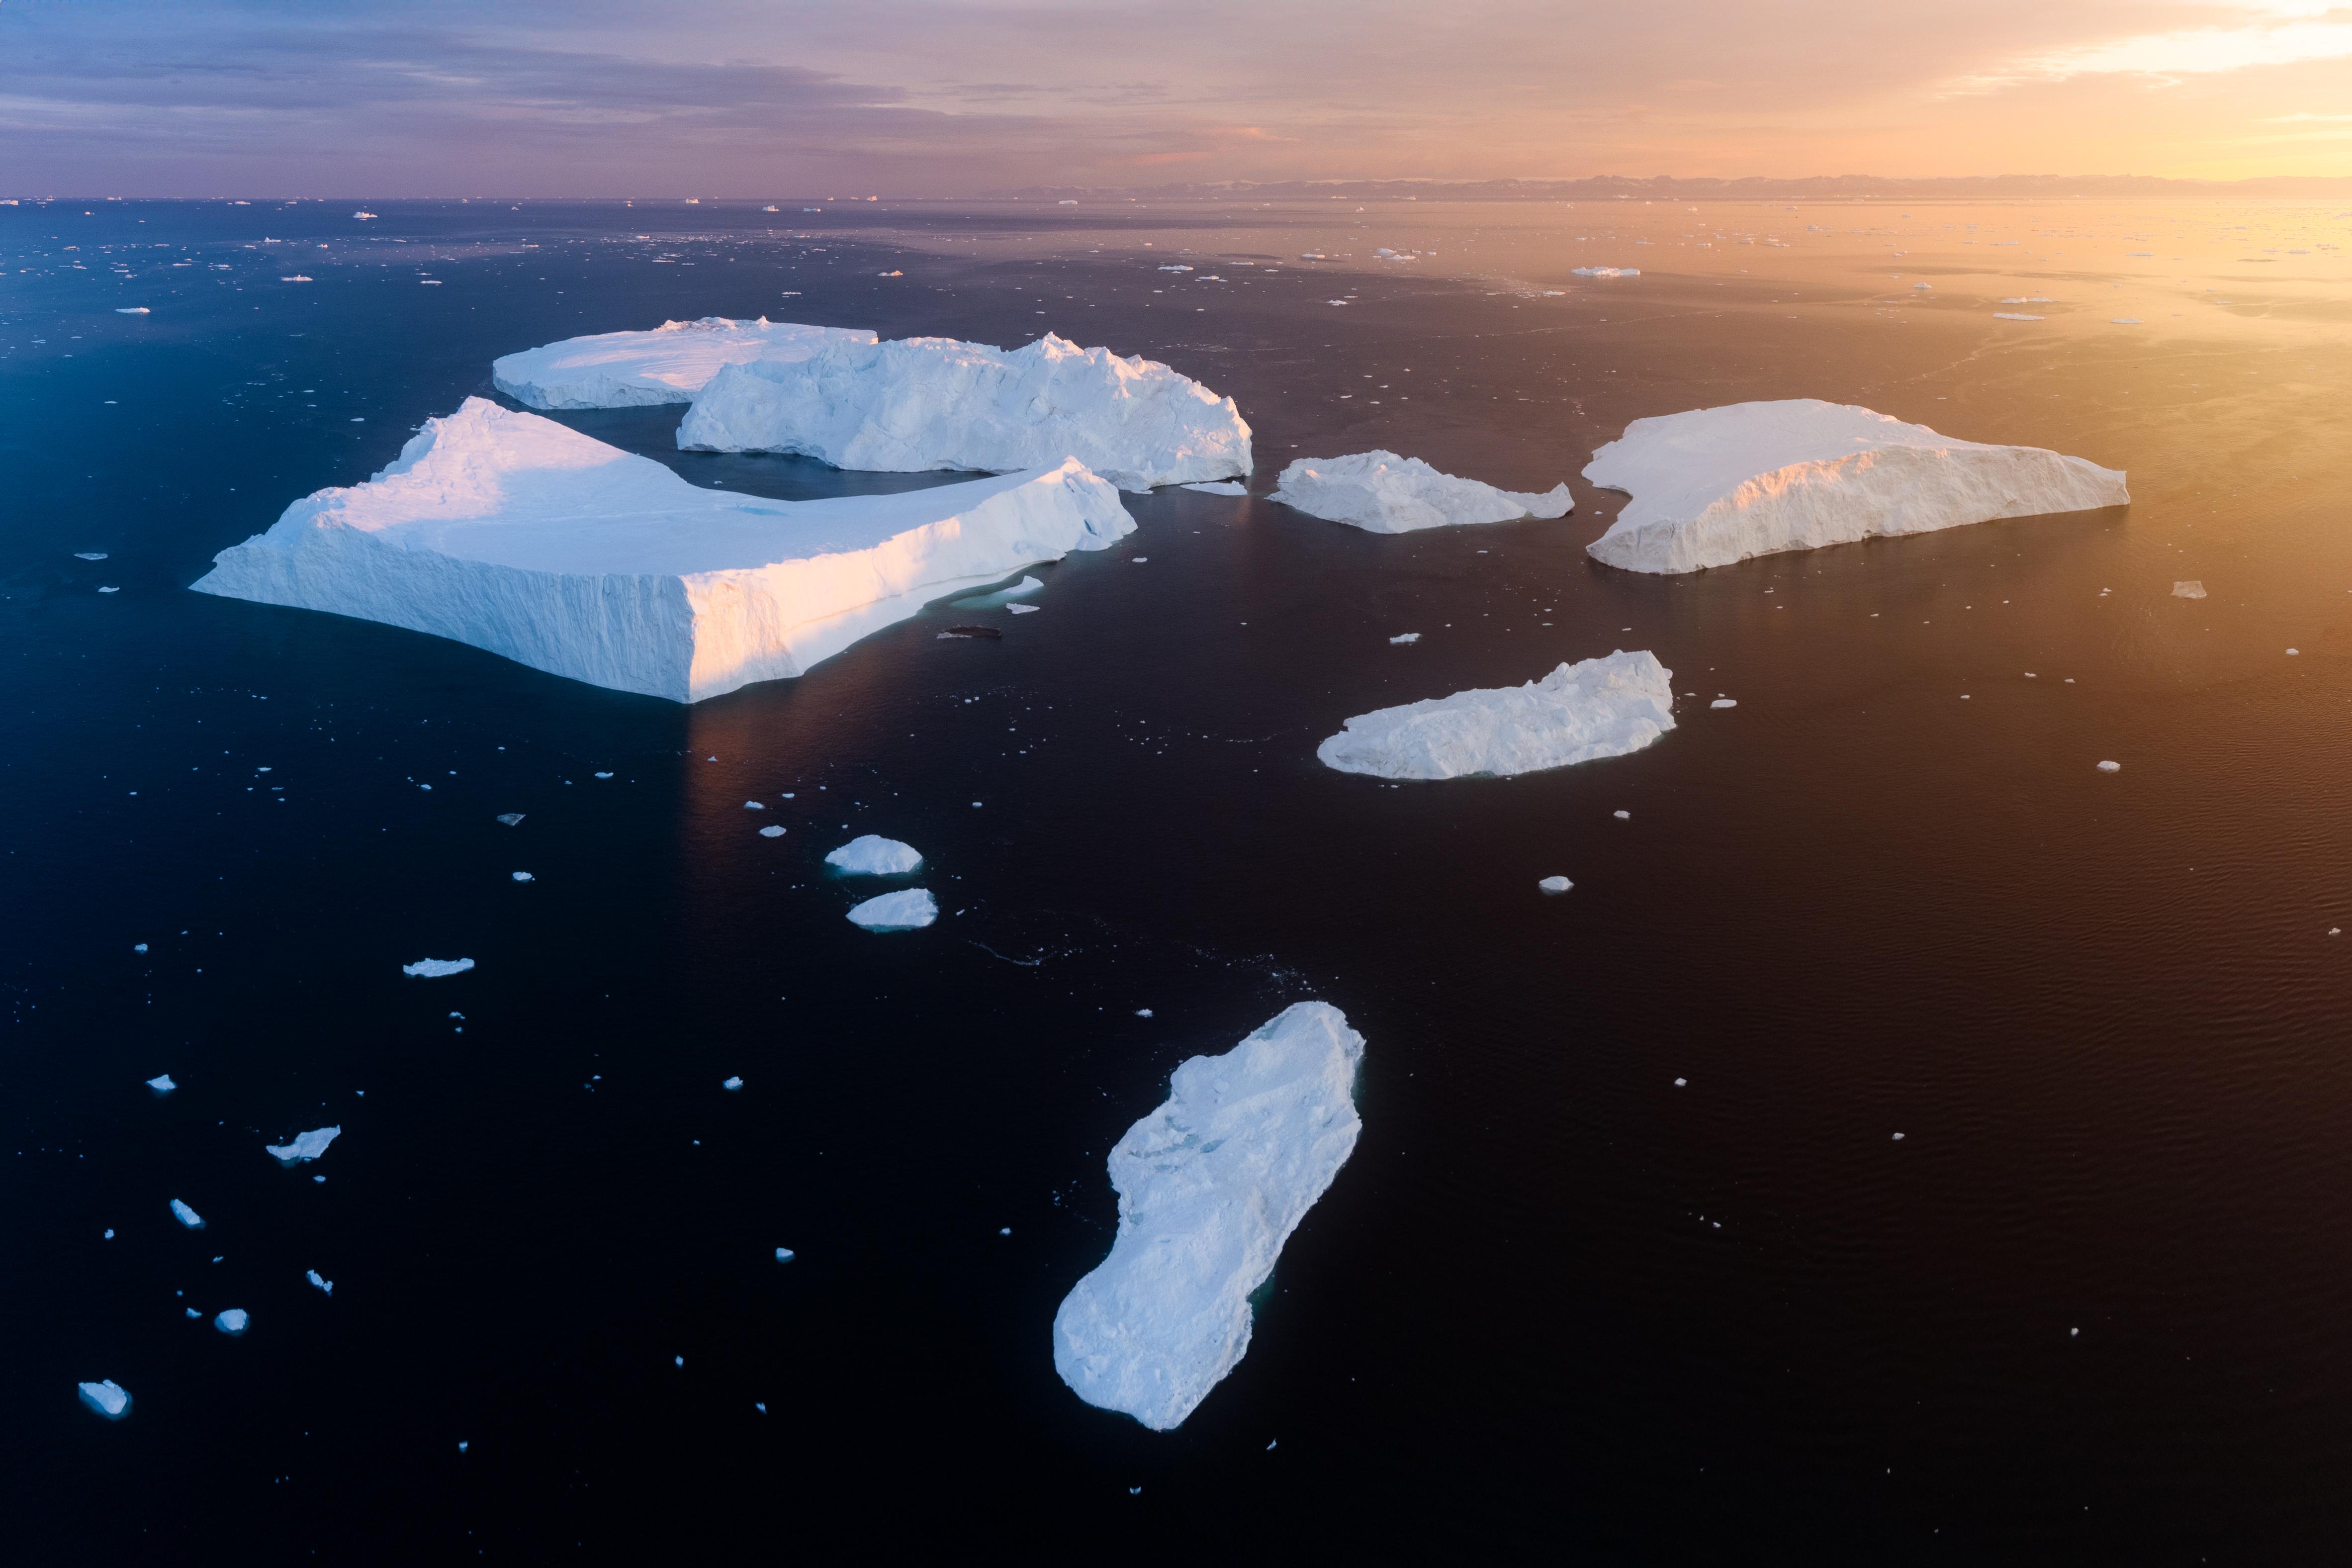 General 4730x3153 iceberg ice sea nature landscape aerial view Greenland Ilulissat Icefjord fjord sunset water sky sunlight sunset glow